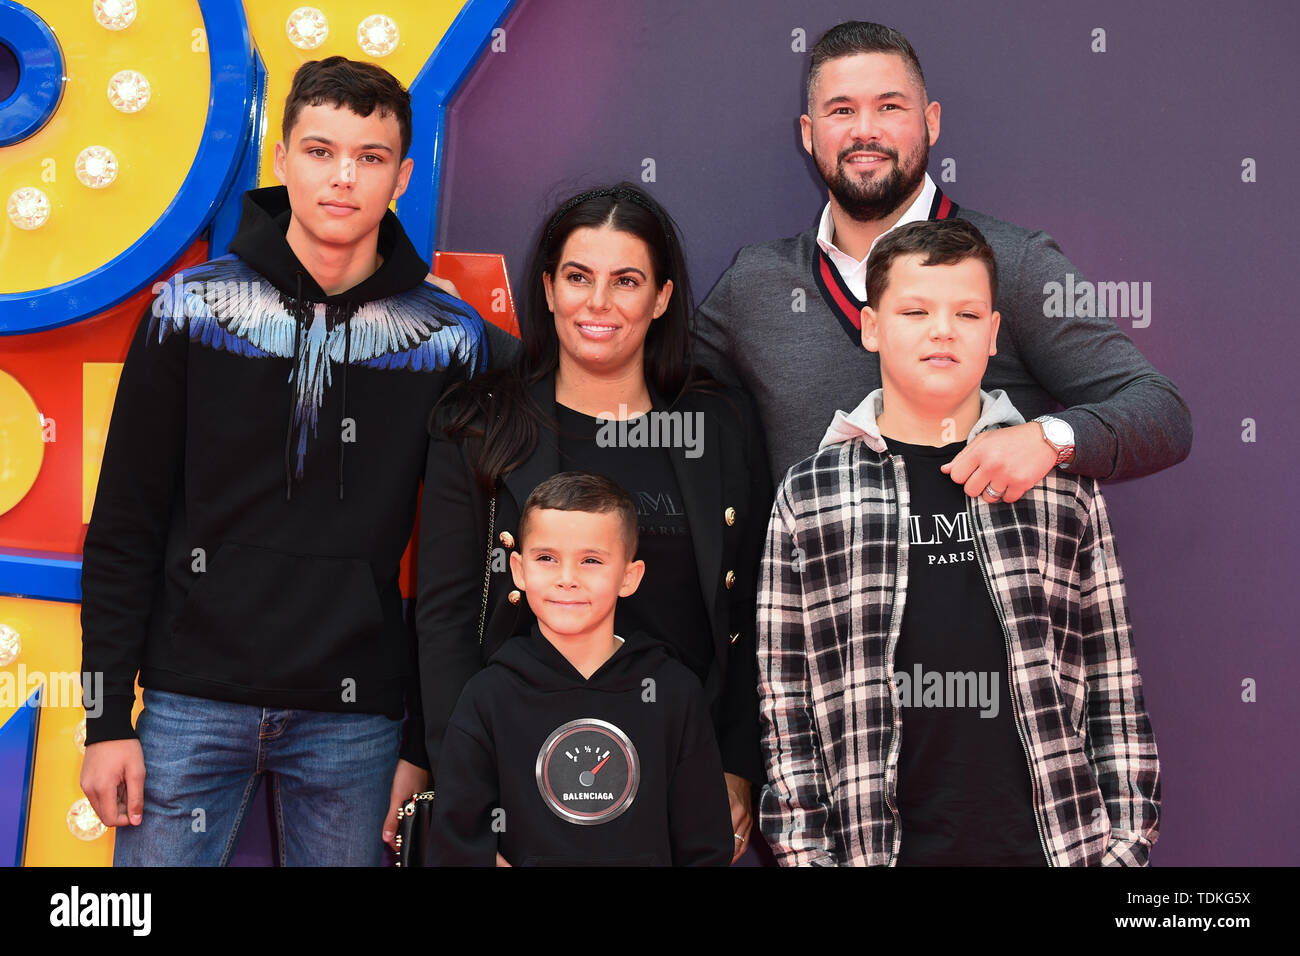 London, UK. 16th June, 2019. LONDON, UK. June 16, 2019: Tony Bellew arriving for the 'Toy Story 4' premiere at the Odeon Luxe, Leicester Square, London. Picture: Steve Vas/Featureflash Credit: Paul Smith/Alamy Live News Stock Photo